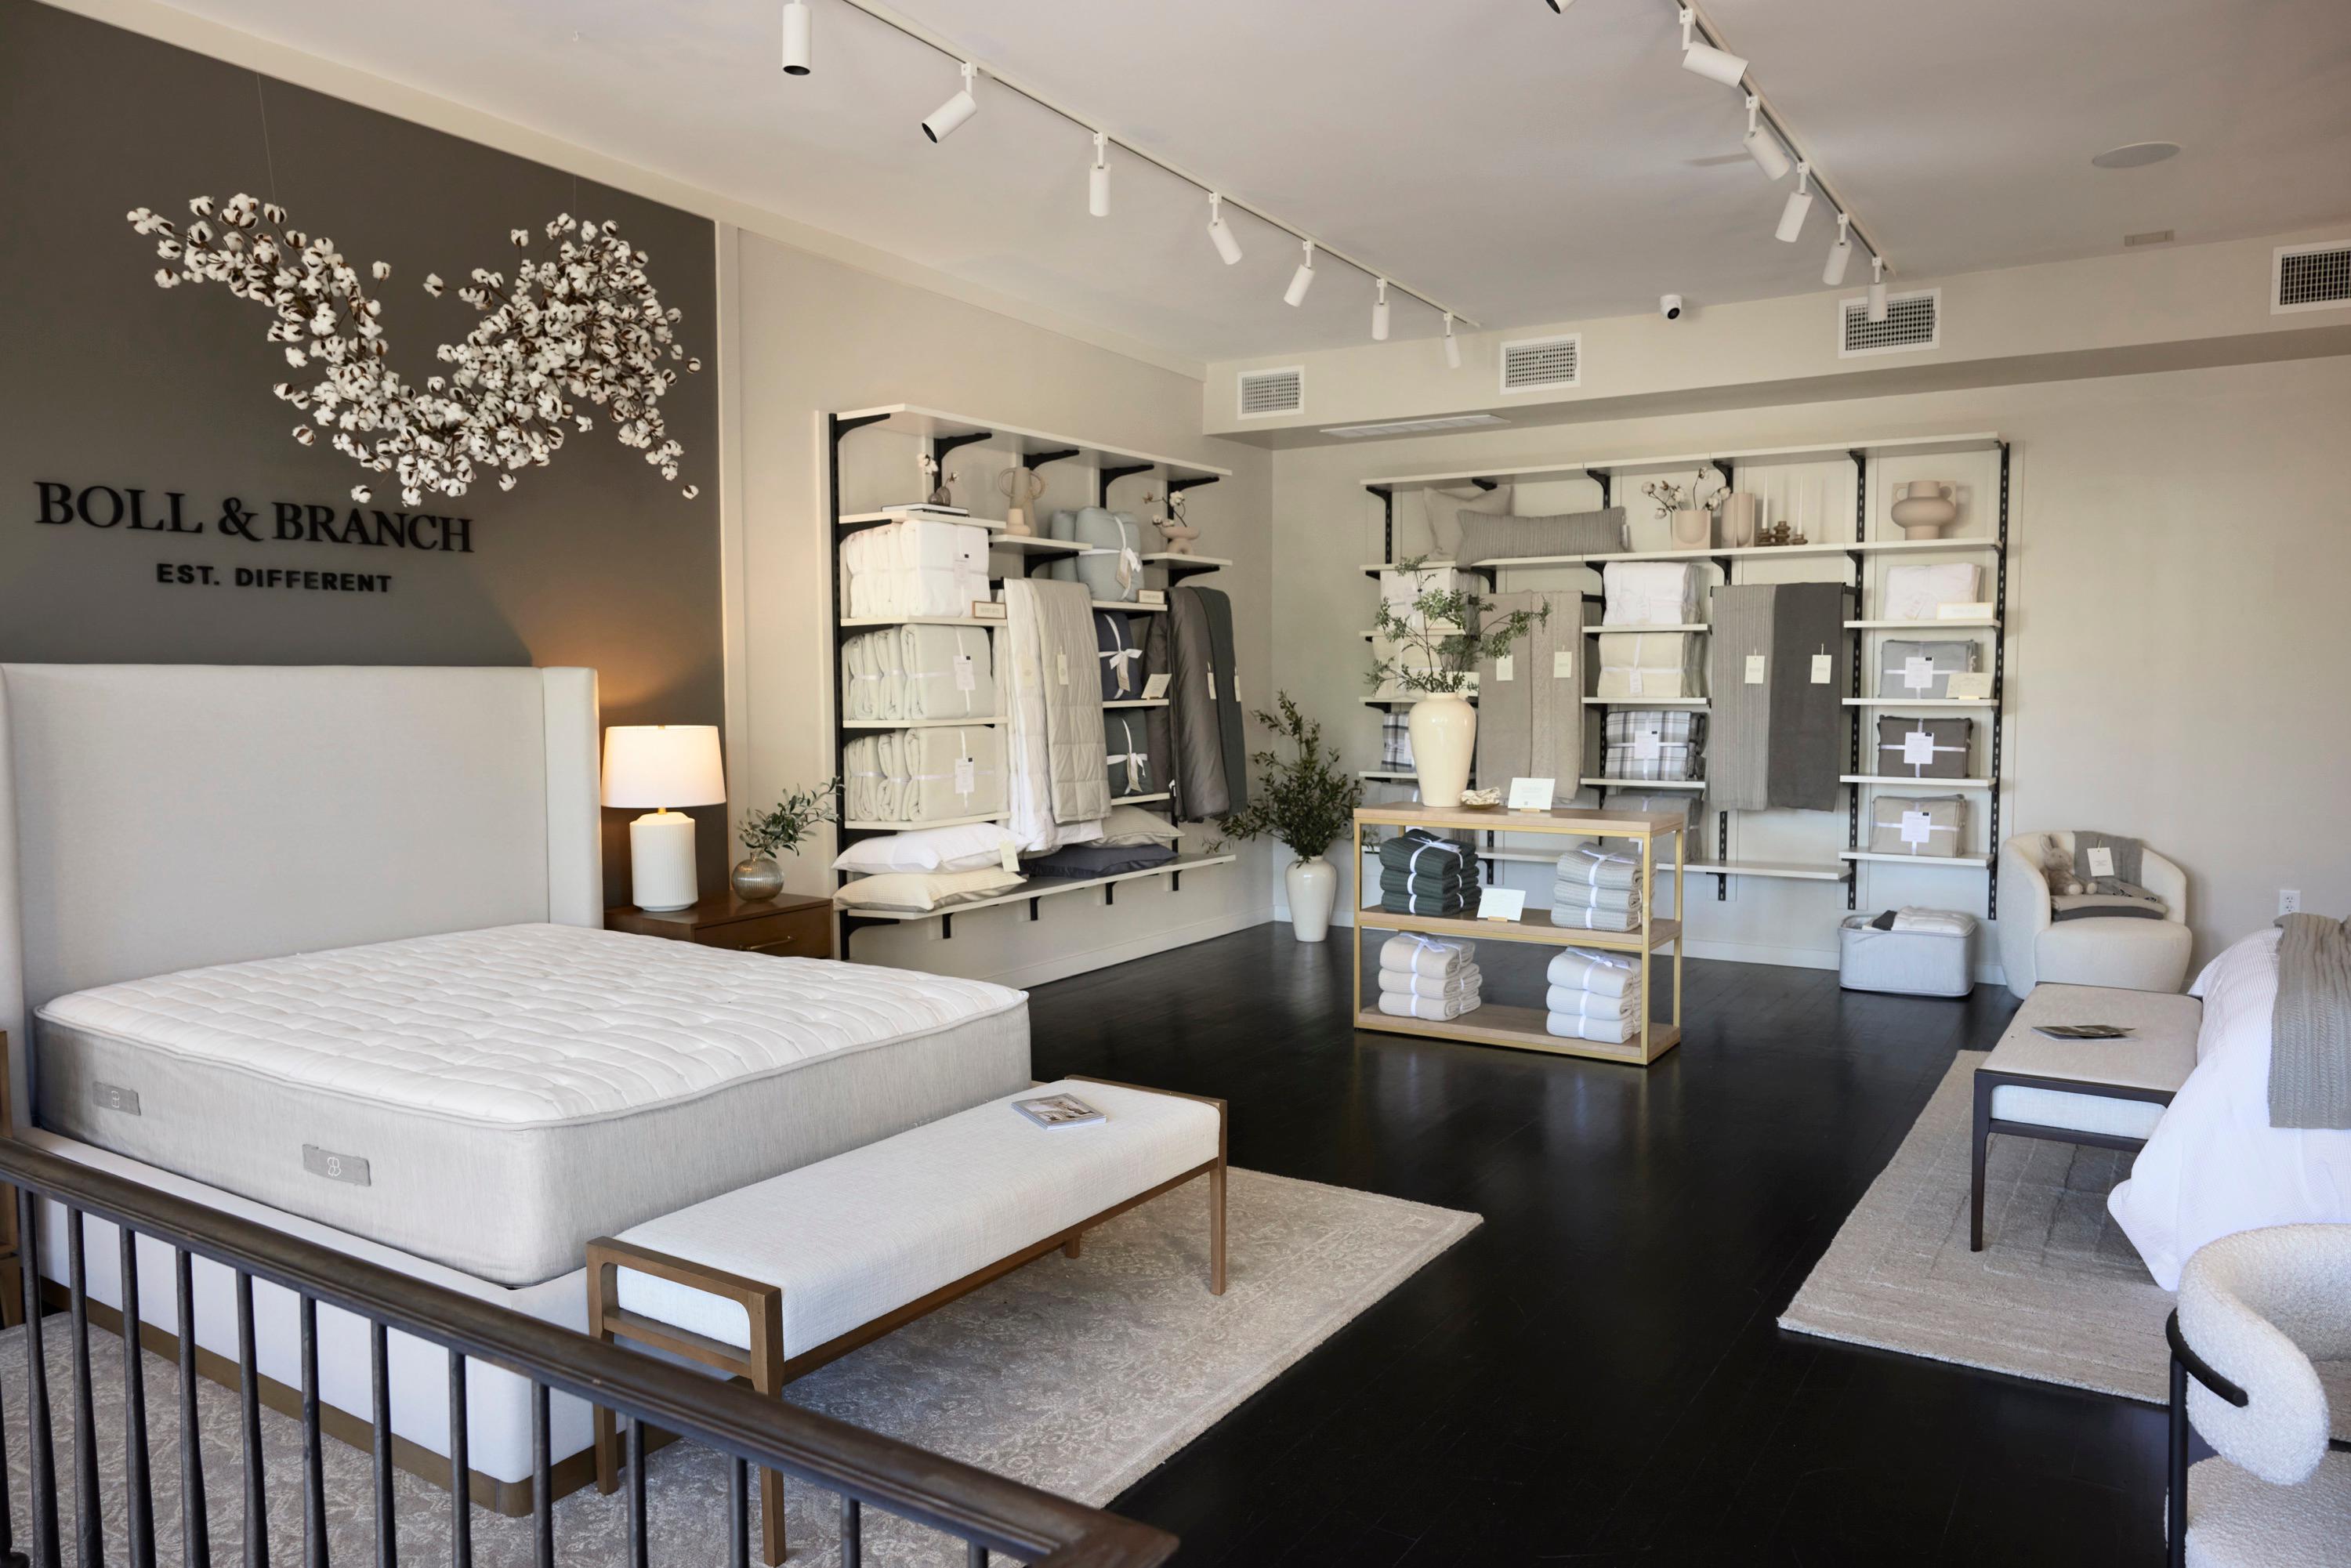 Experience our organic topped mattress on Knox Street